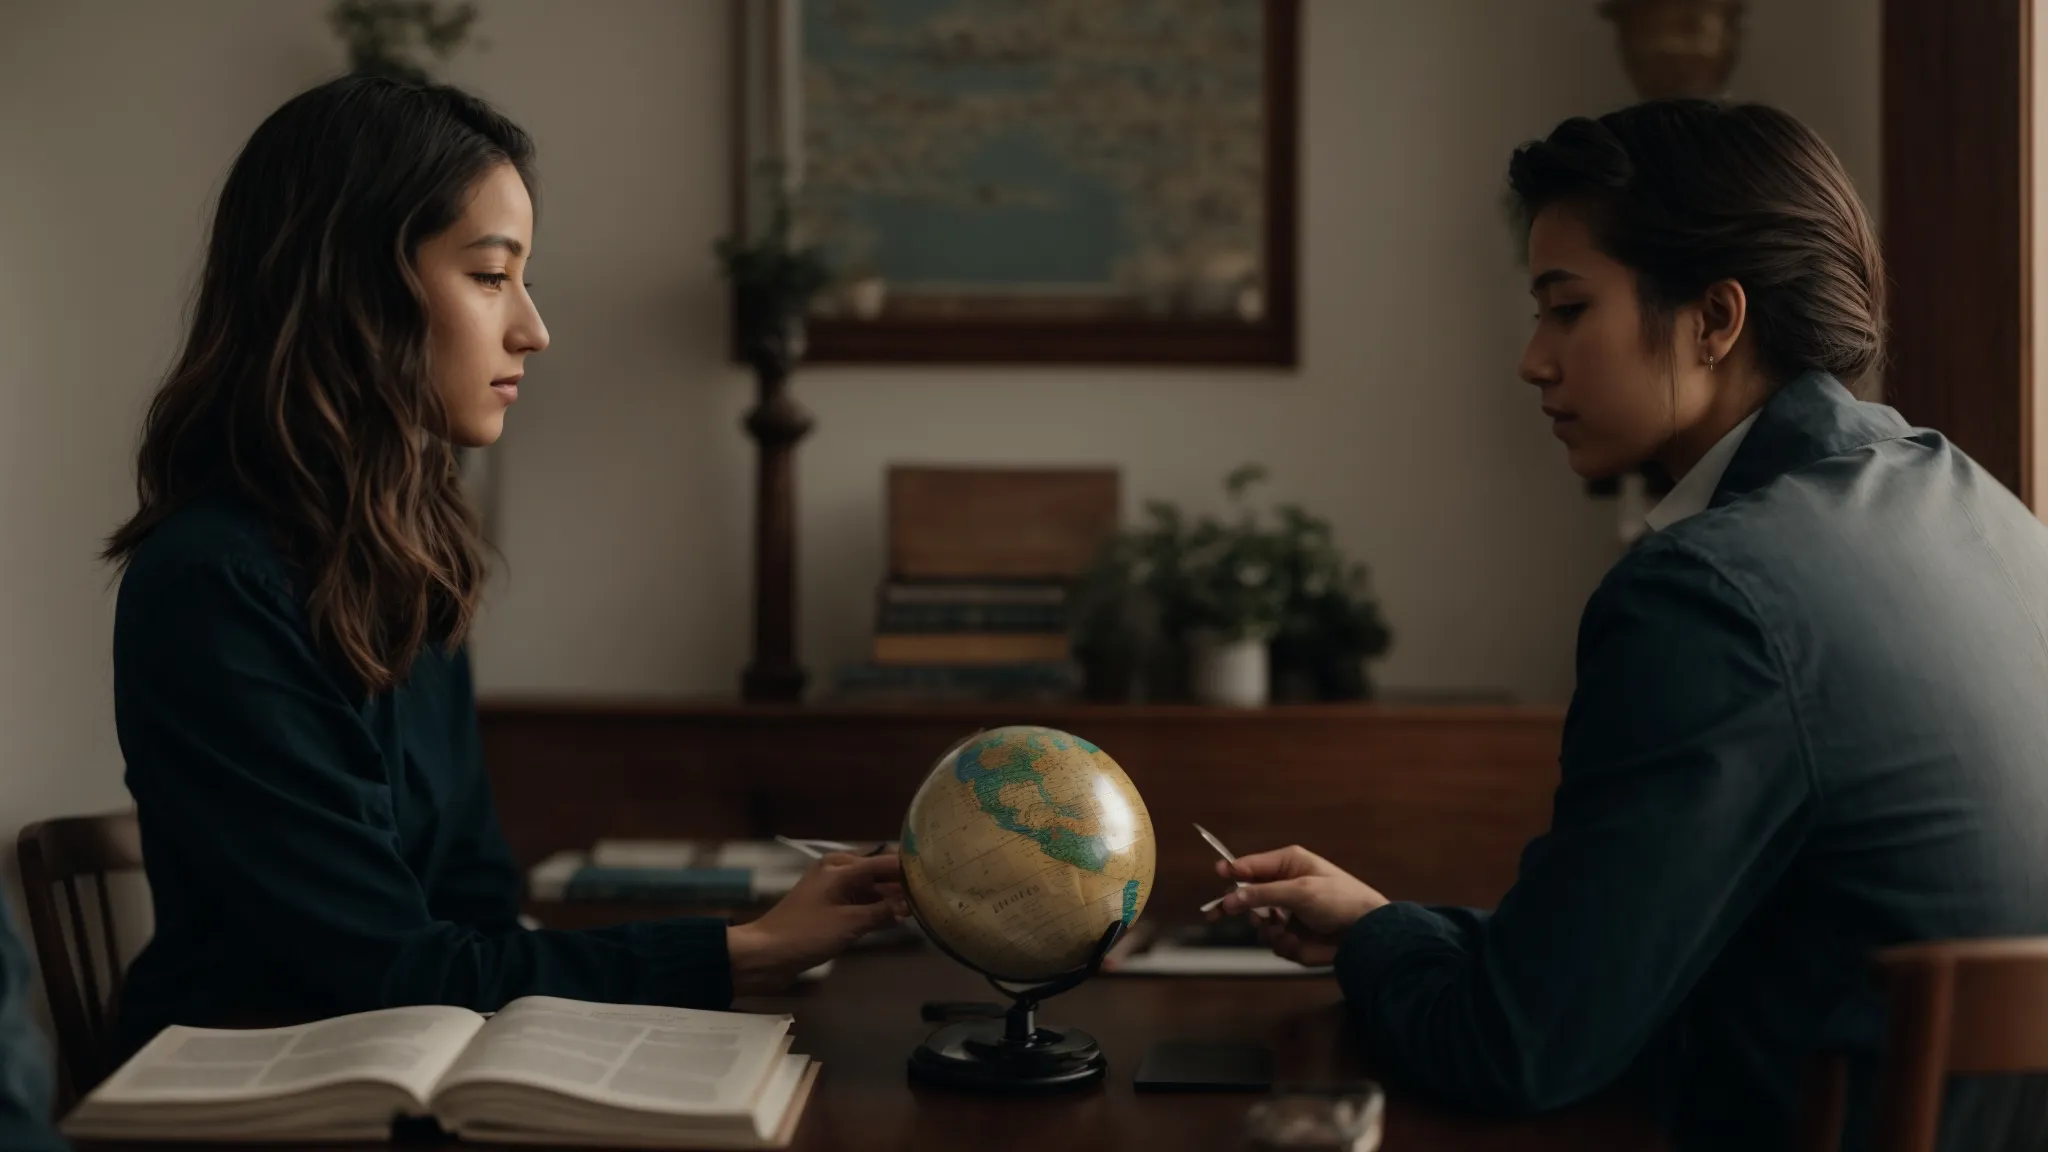 two people conversing across a table with language dictionaries and a globe between them.